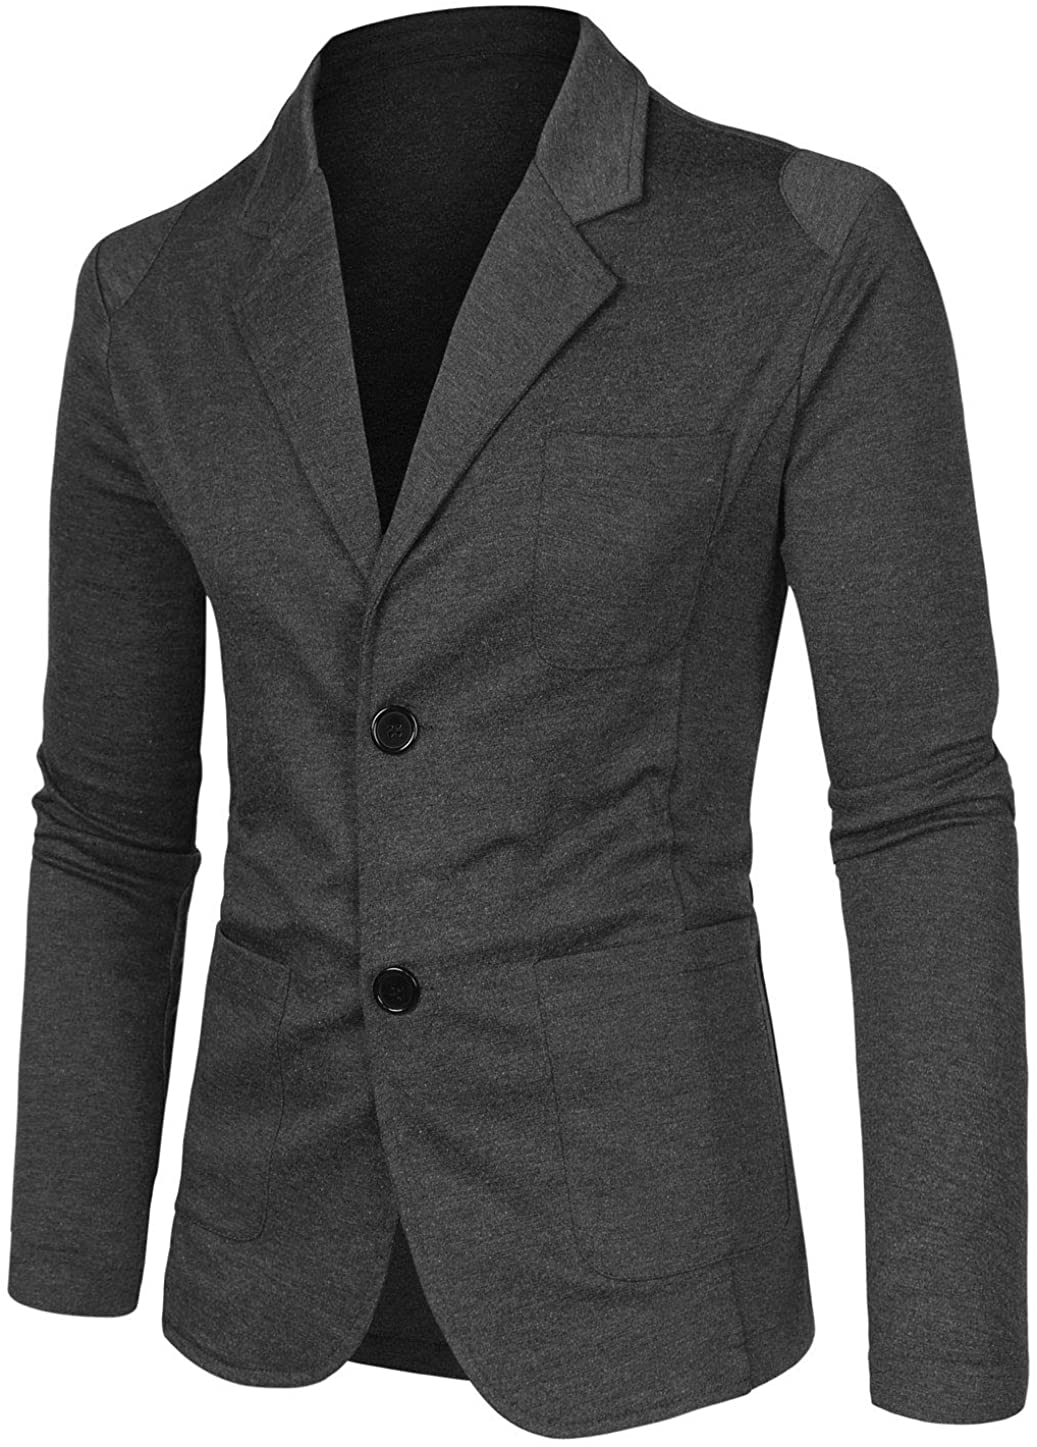 Uxcell Men's Casual Sports Coat Slim Fit Lightweight Button Cardigan Knit Blazer with Pockets